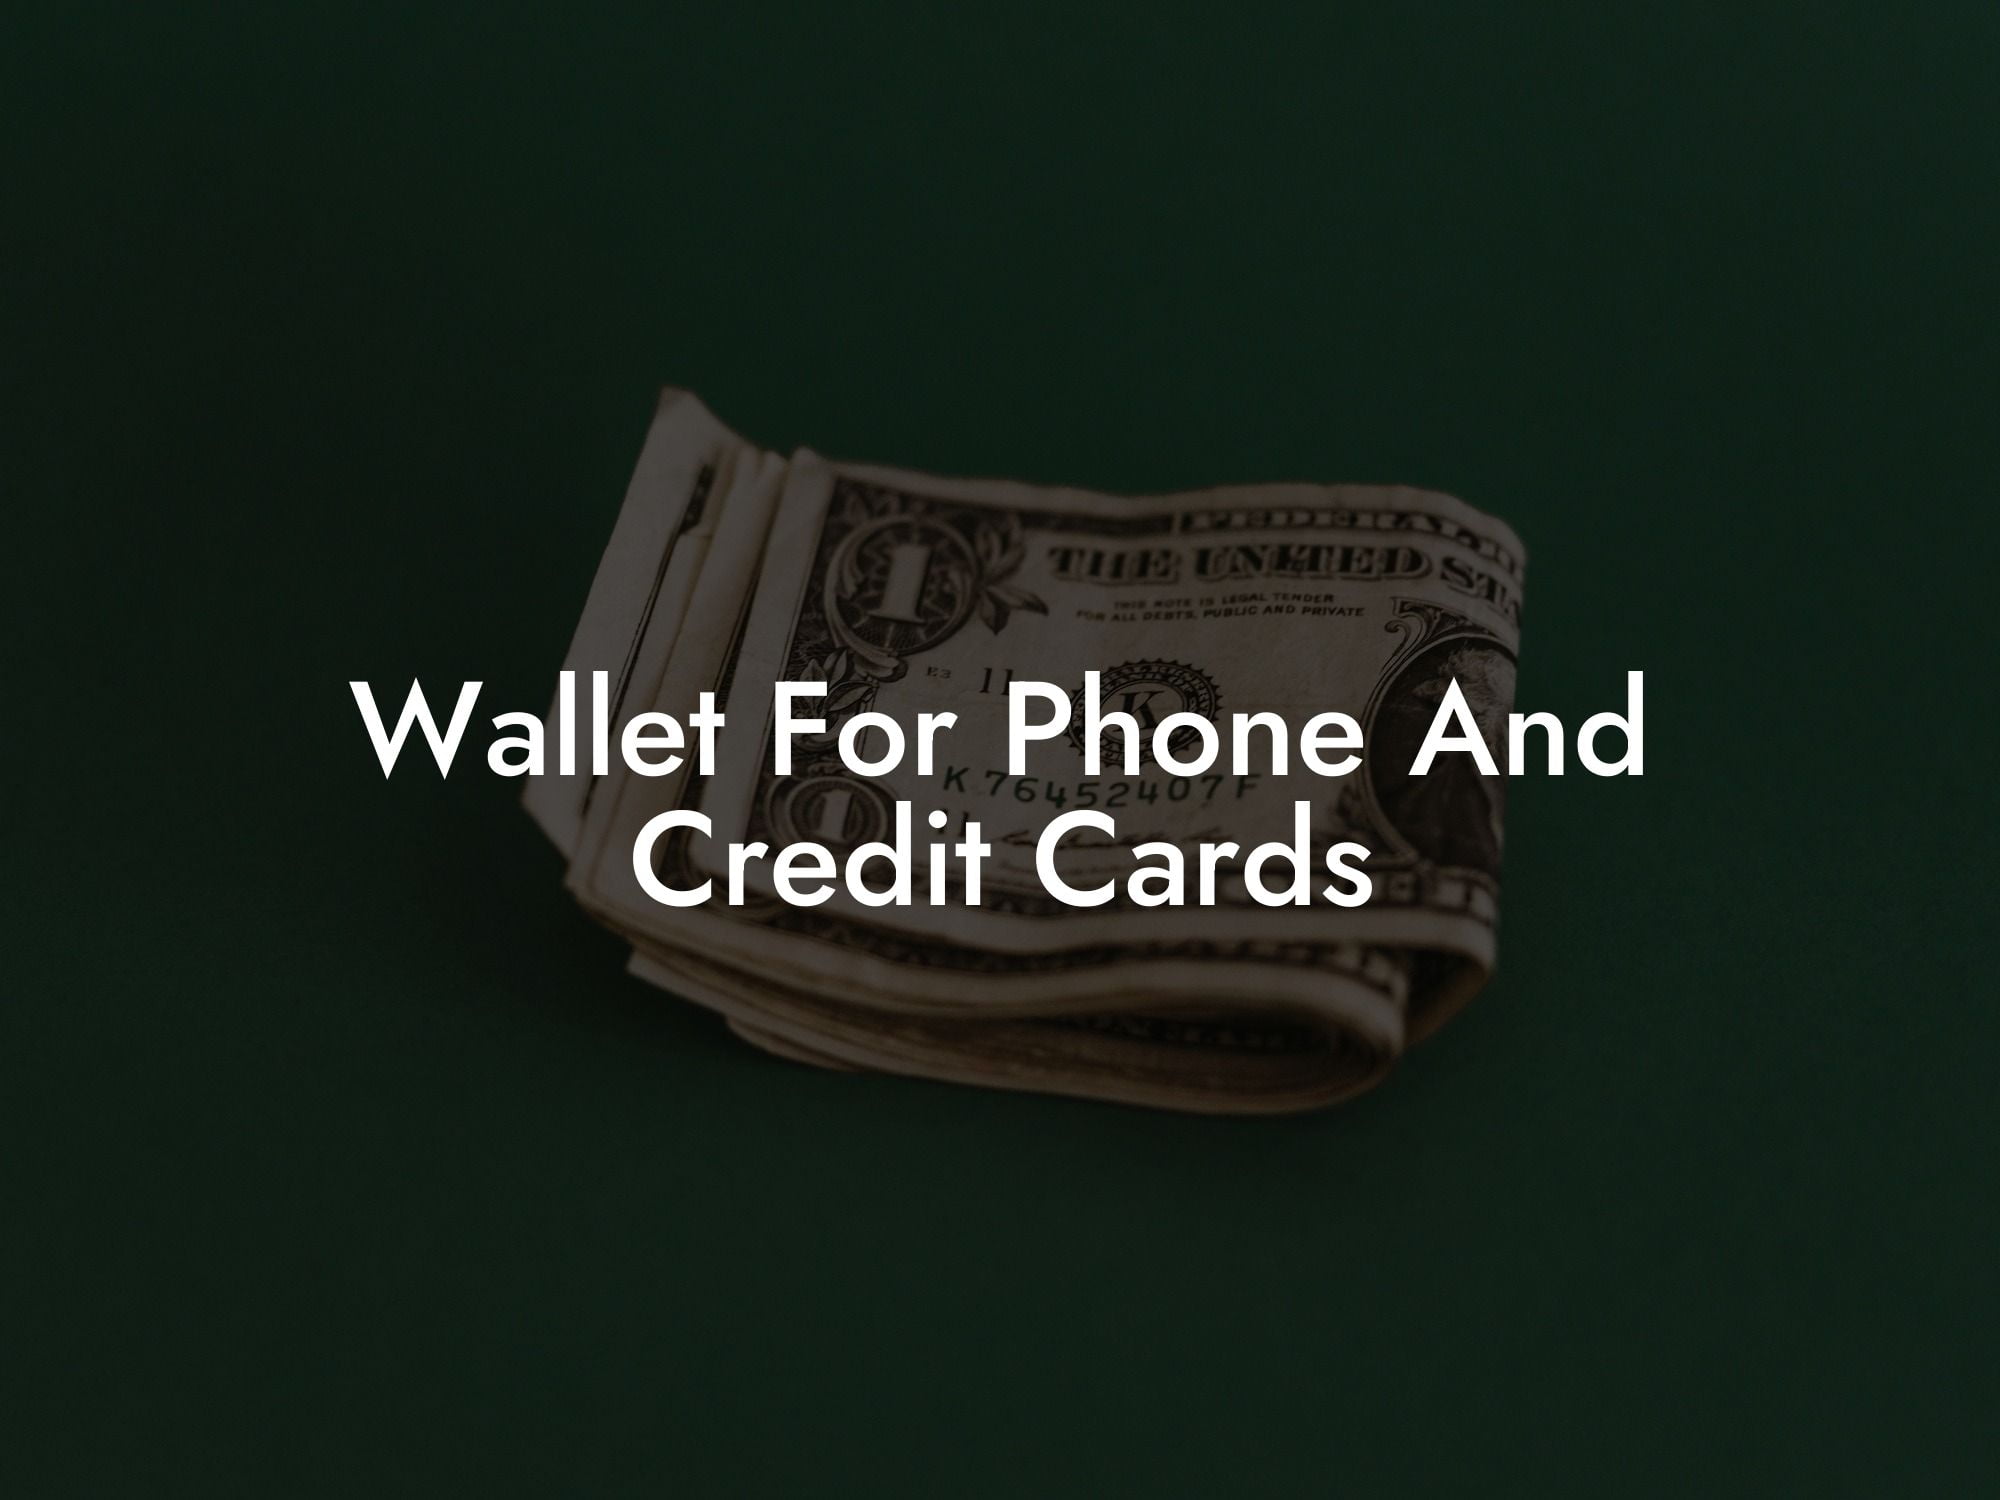 Wallet For Phone And Credit Cards